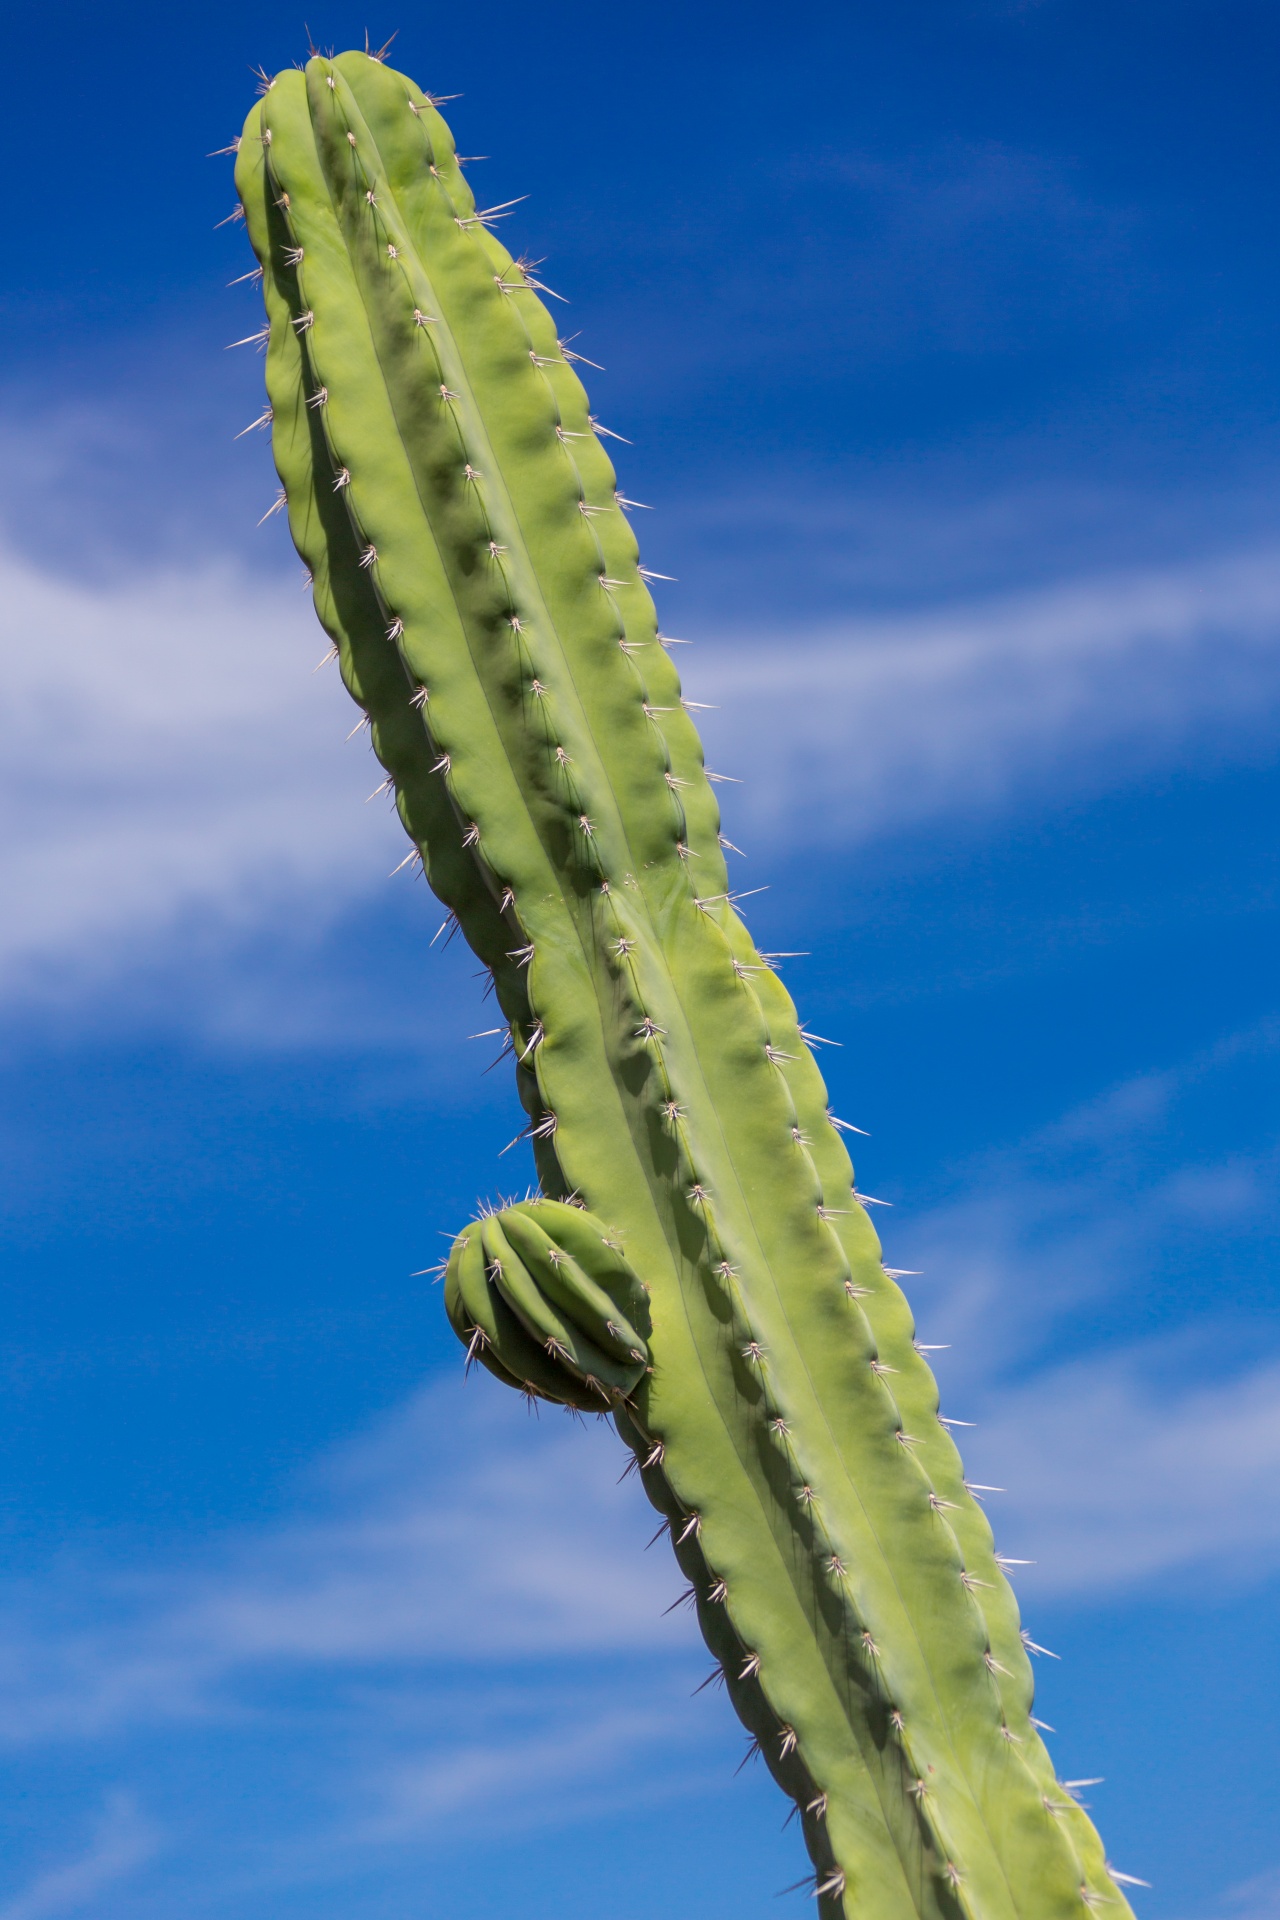 Cactus And Sky